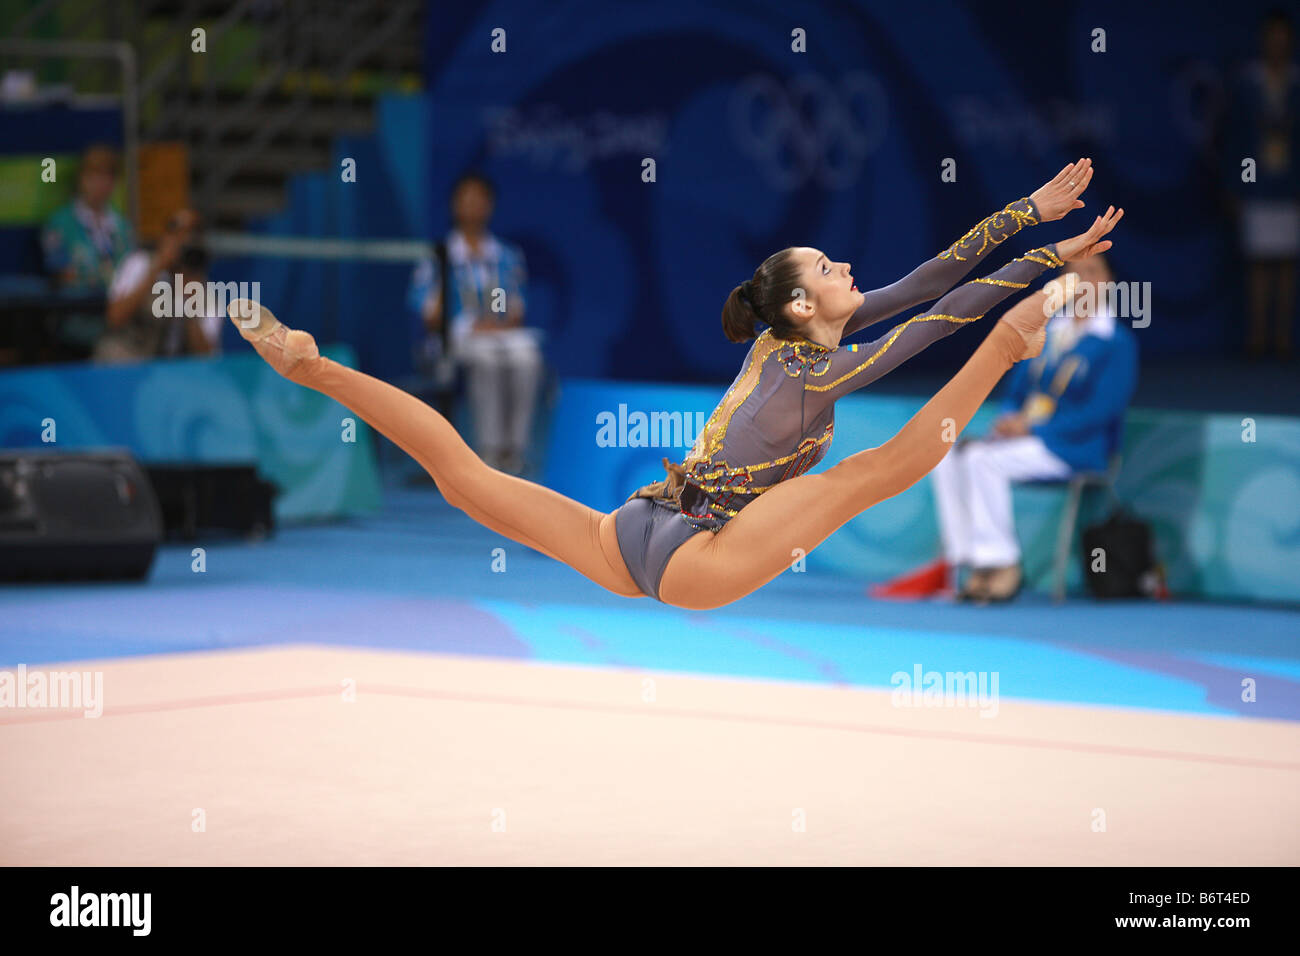 Aug 23, 2008; Beijing, China; Rhythmic gymnast Anna Bessonova (Ukraine) leaps with clubs to win bronze medal at 2008 Olympics. Stock Photo